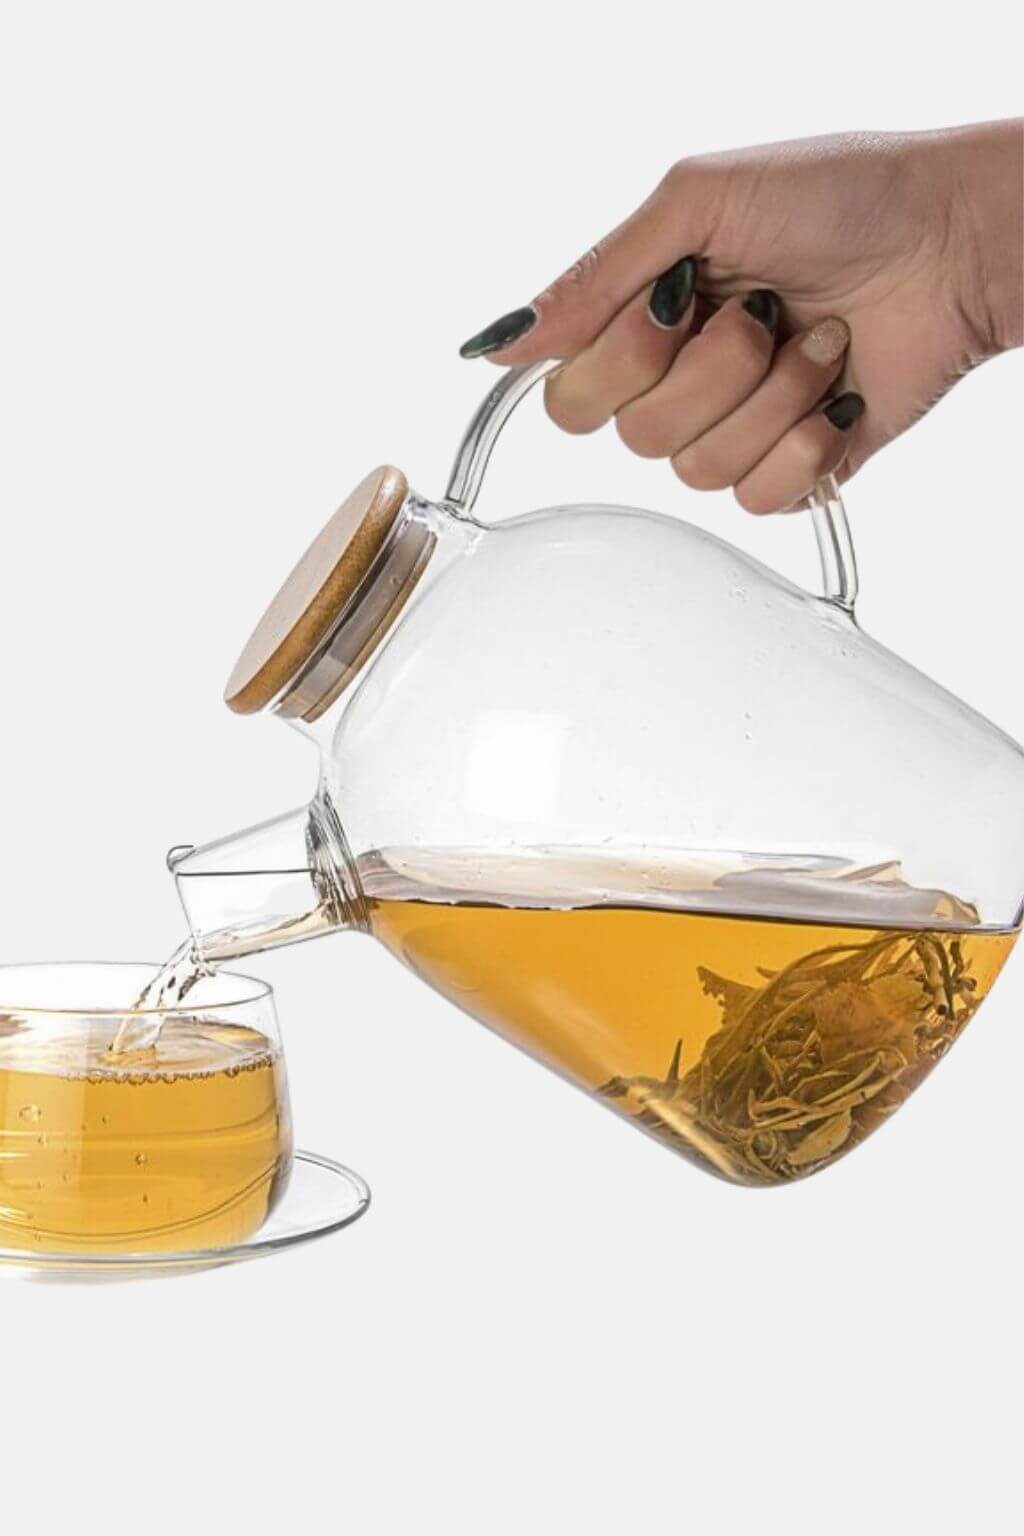 Borosilicate glass & Bamboo teapot with infuser and filter